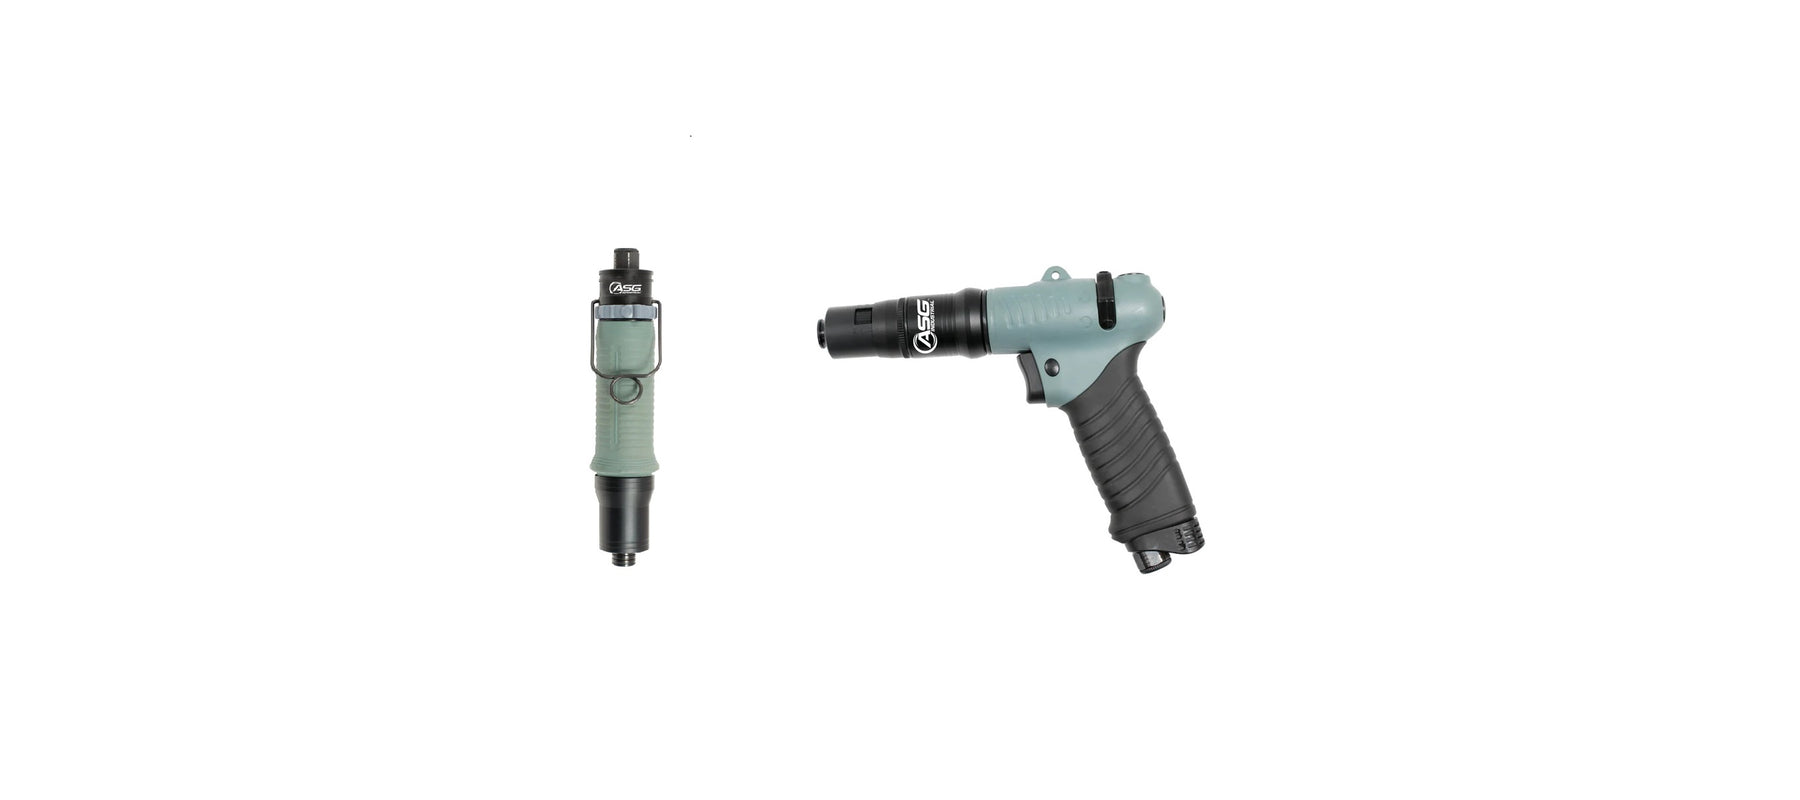 Pneumatic Screwdrivers now available from ASG & HIOS